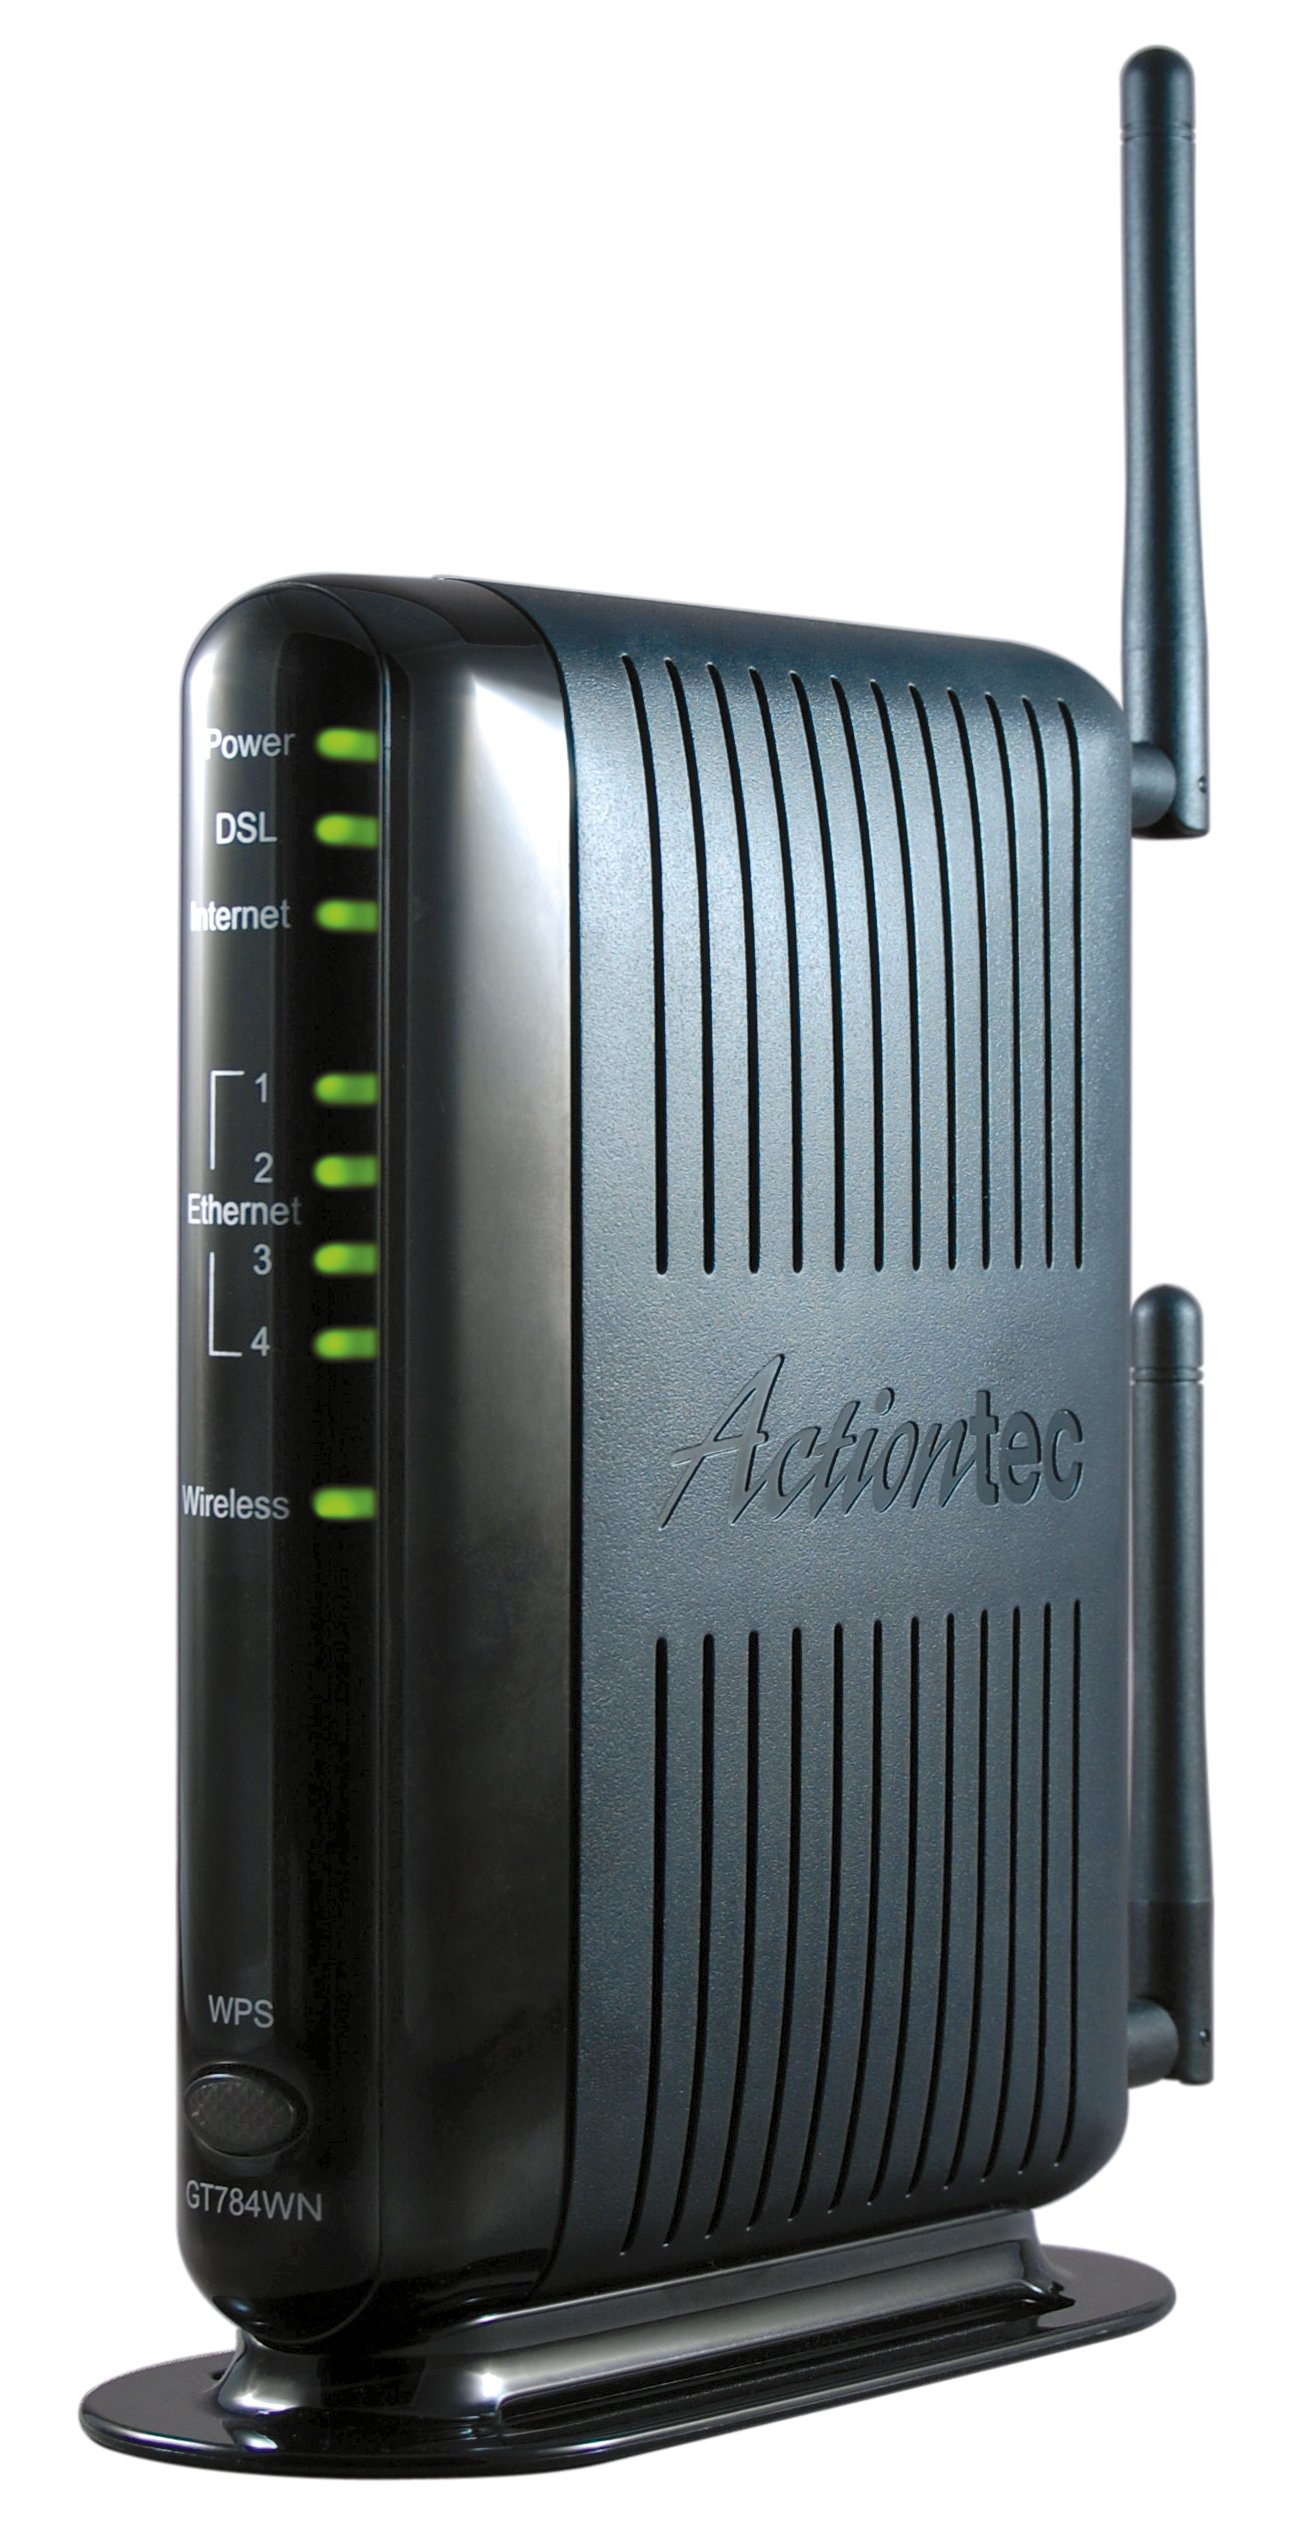 Actiontec 300 Mbps ワイヤレス N ADSL モデム ルーター (GT784WN)